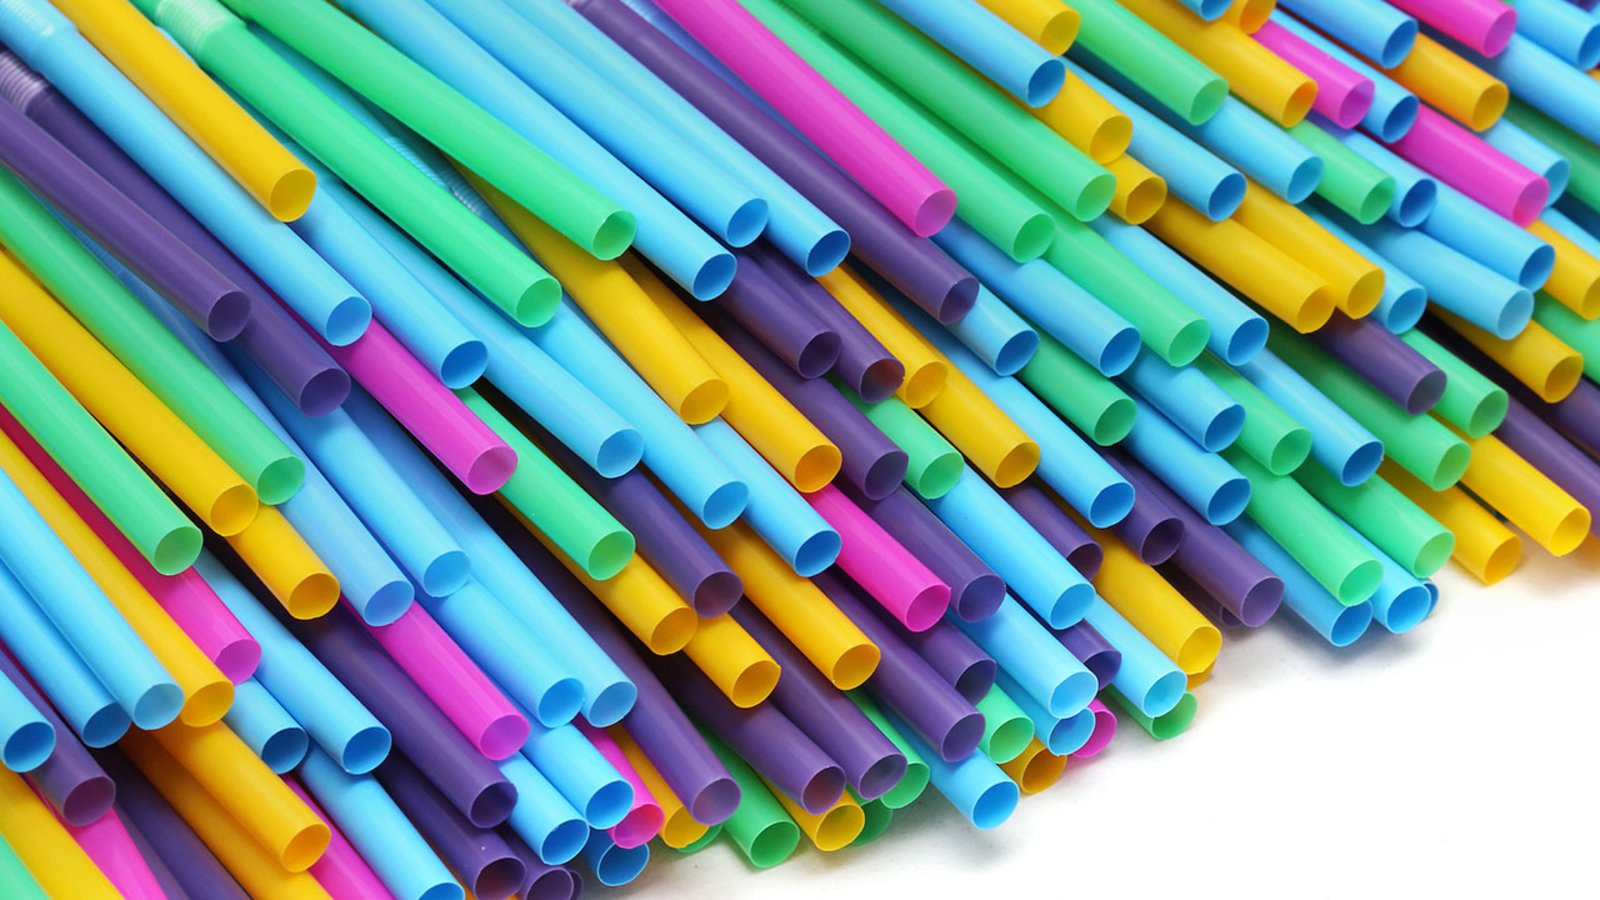 Food service company ditches plastic straws at 1,000 locations